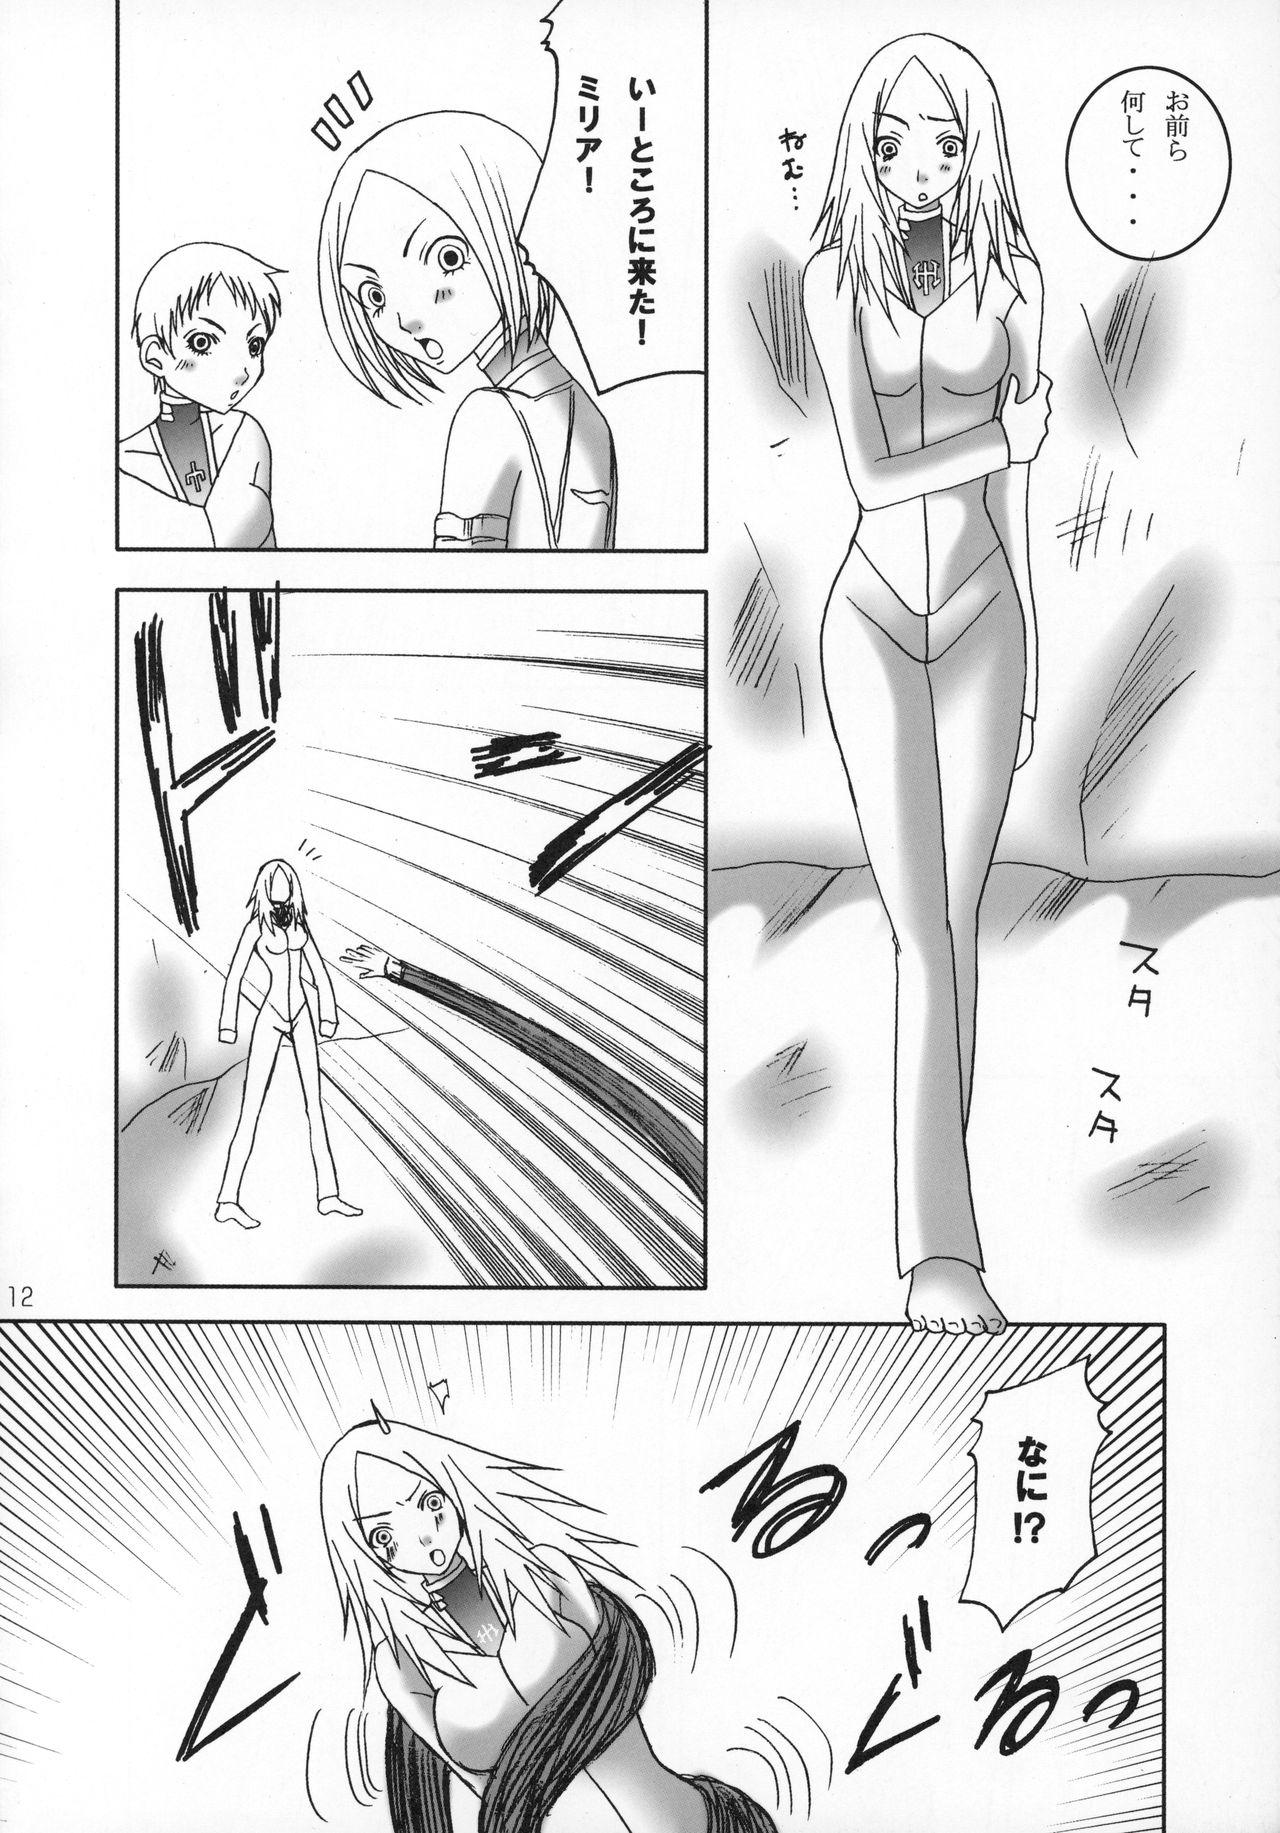 Cruising Claymore no 3P Bon DX - Claymore Sex Party - Page 11